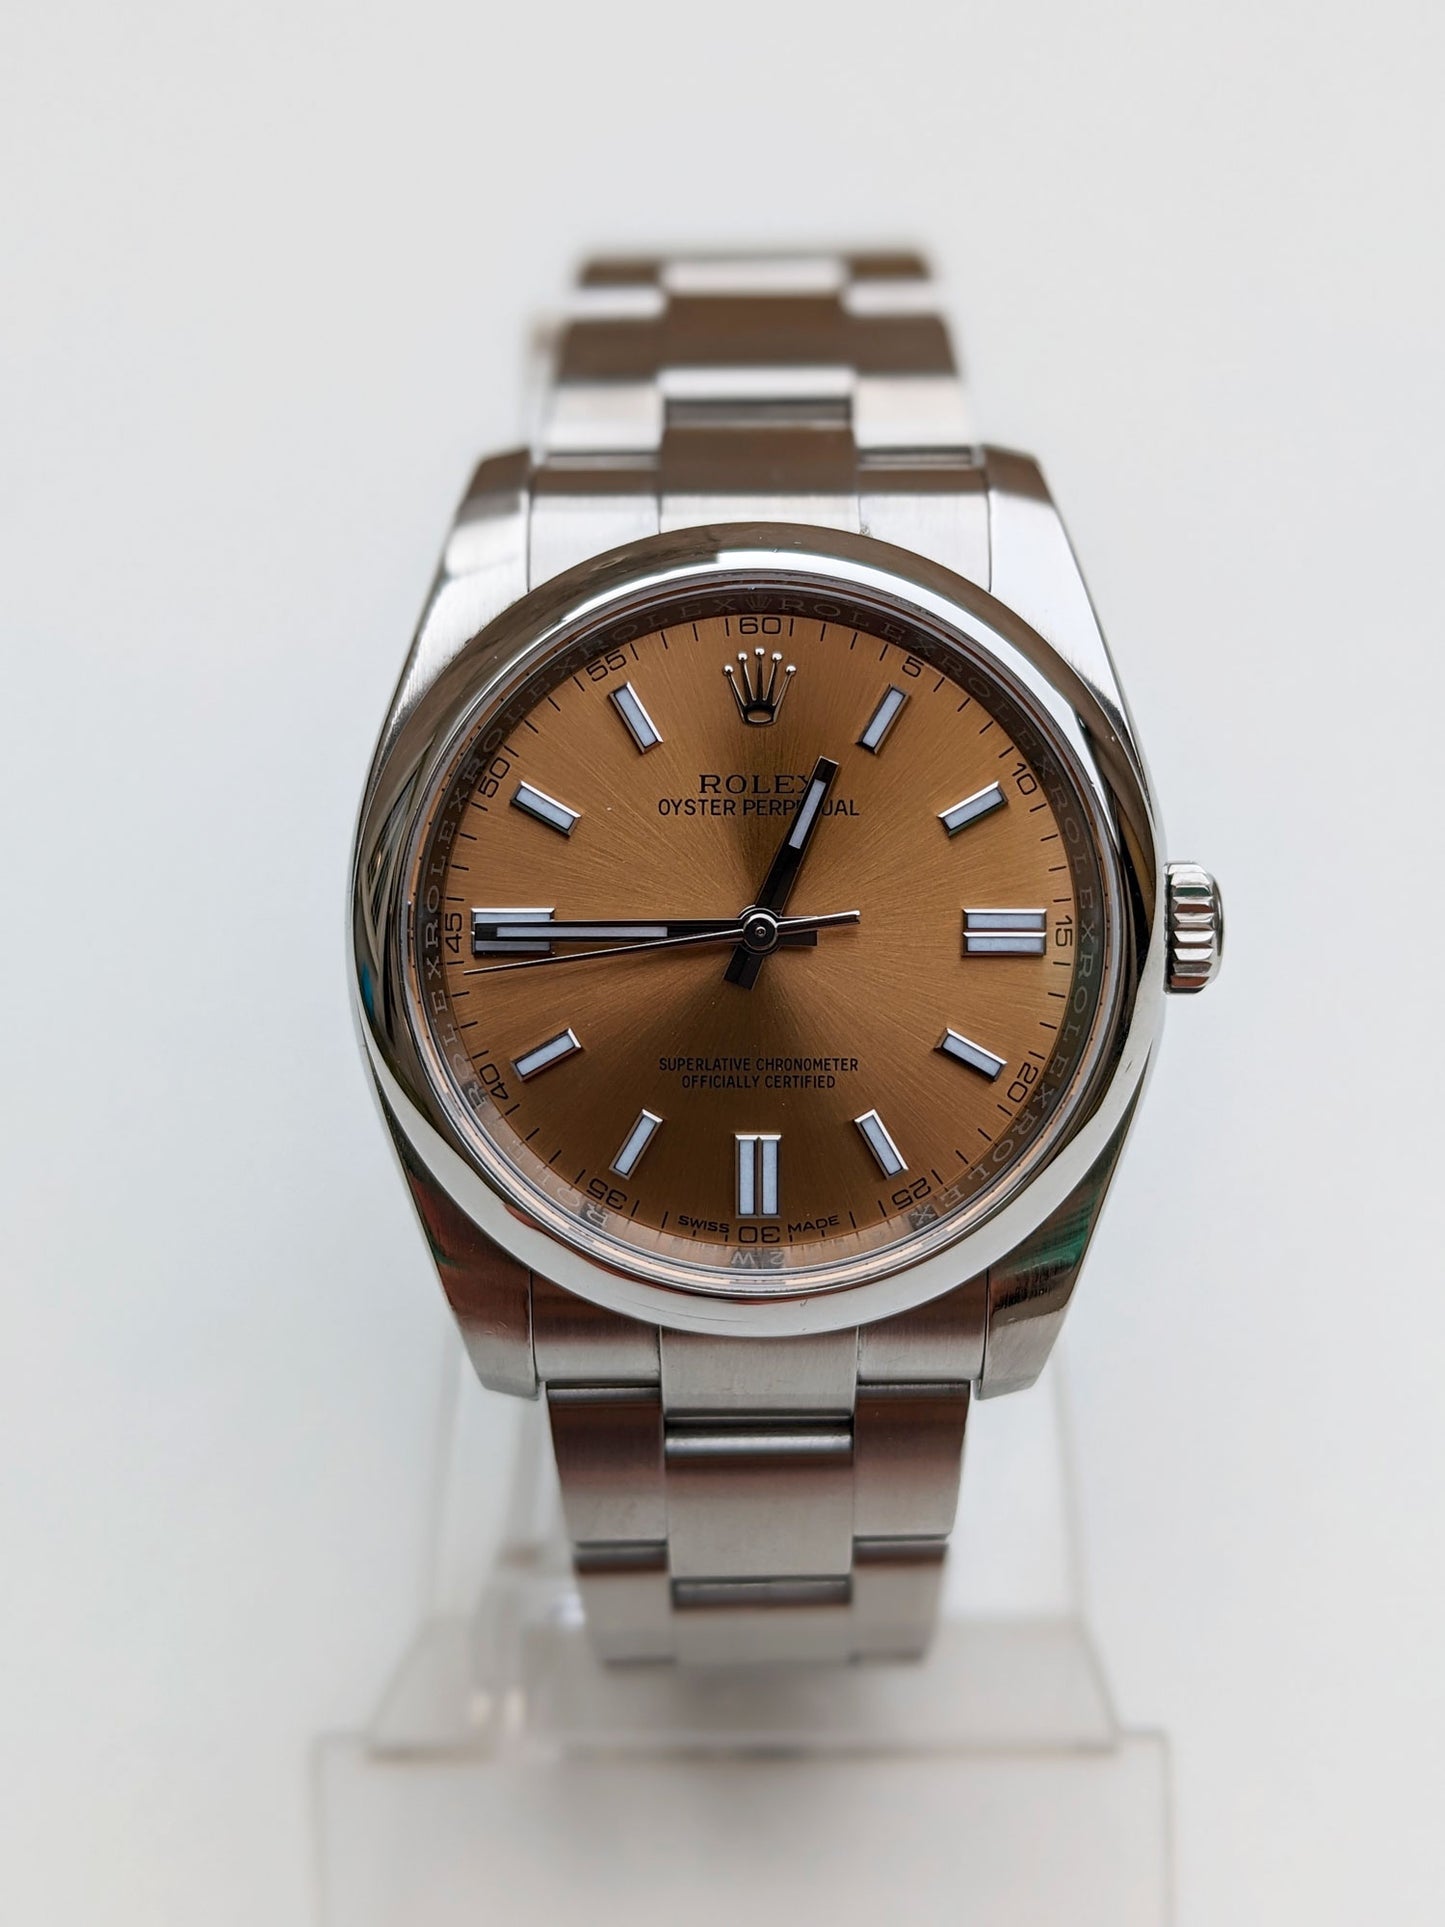 Rolex Oyster Perpetual 36 face